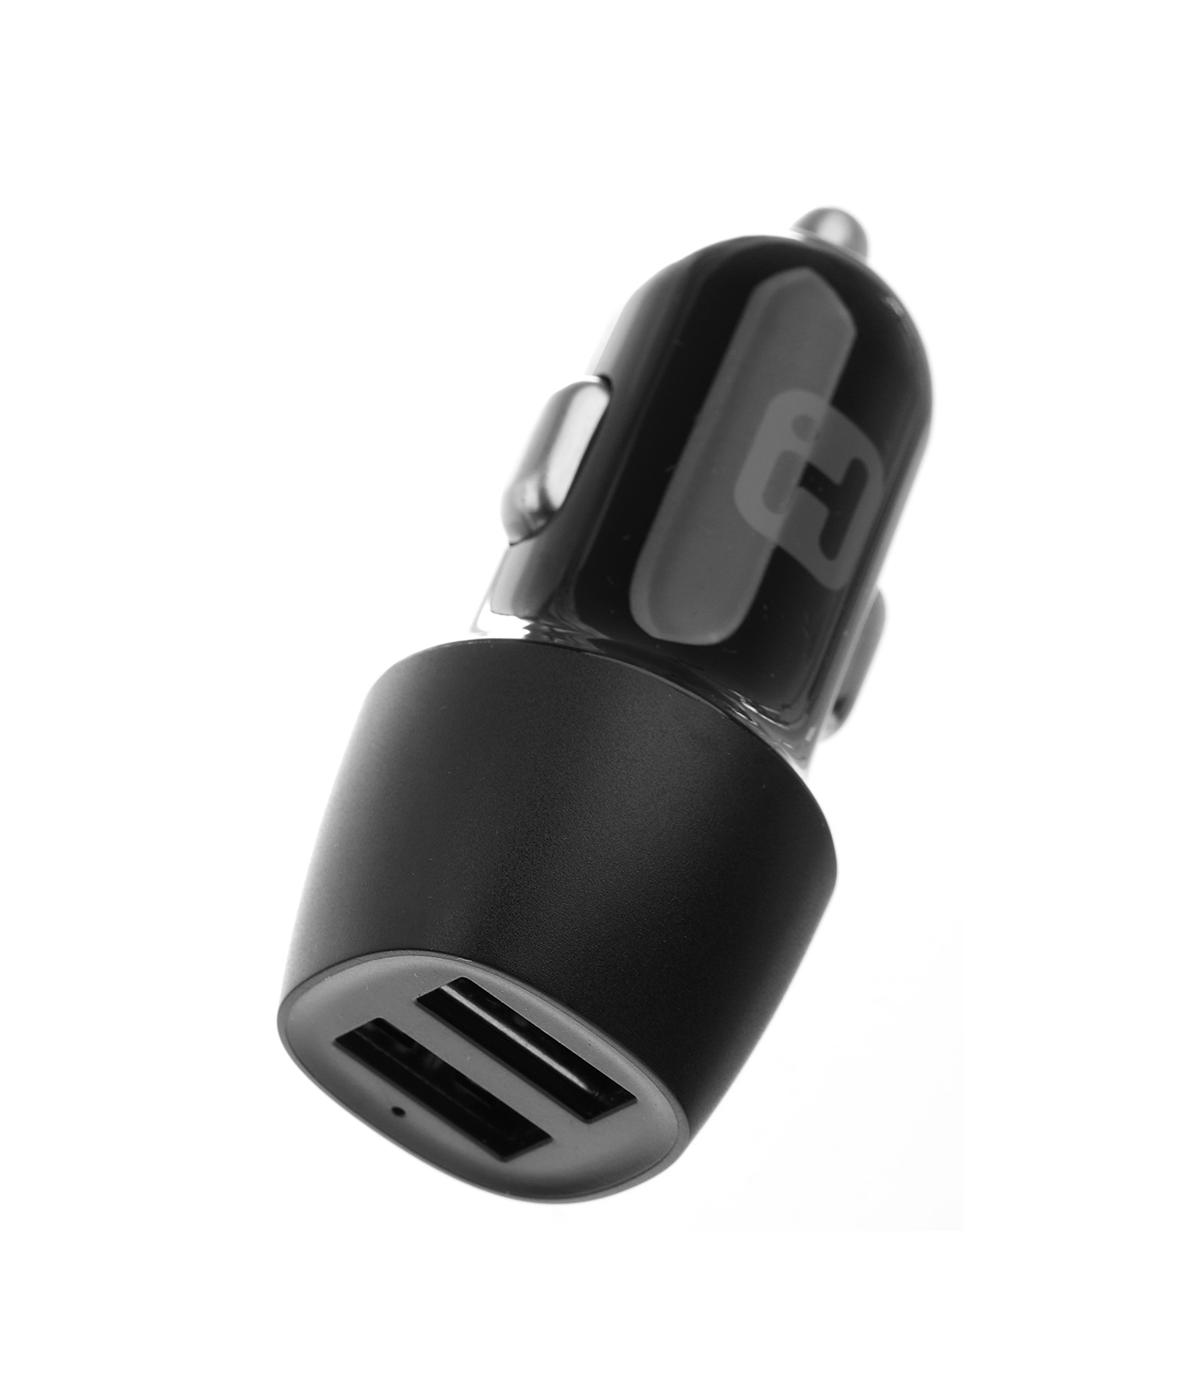 iHome Dual Port USB Car Charger - Black; image 2 of 2